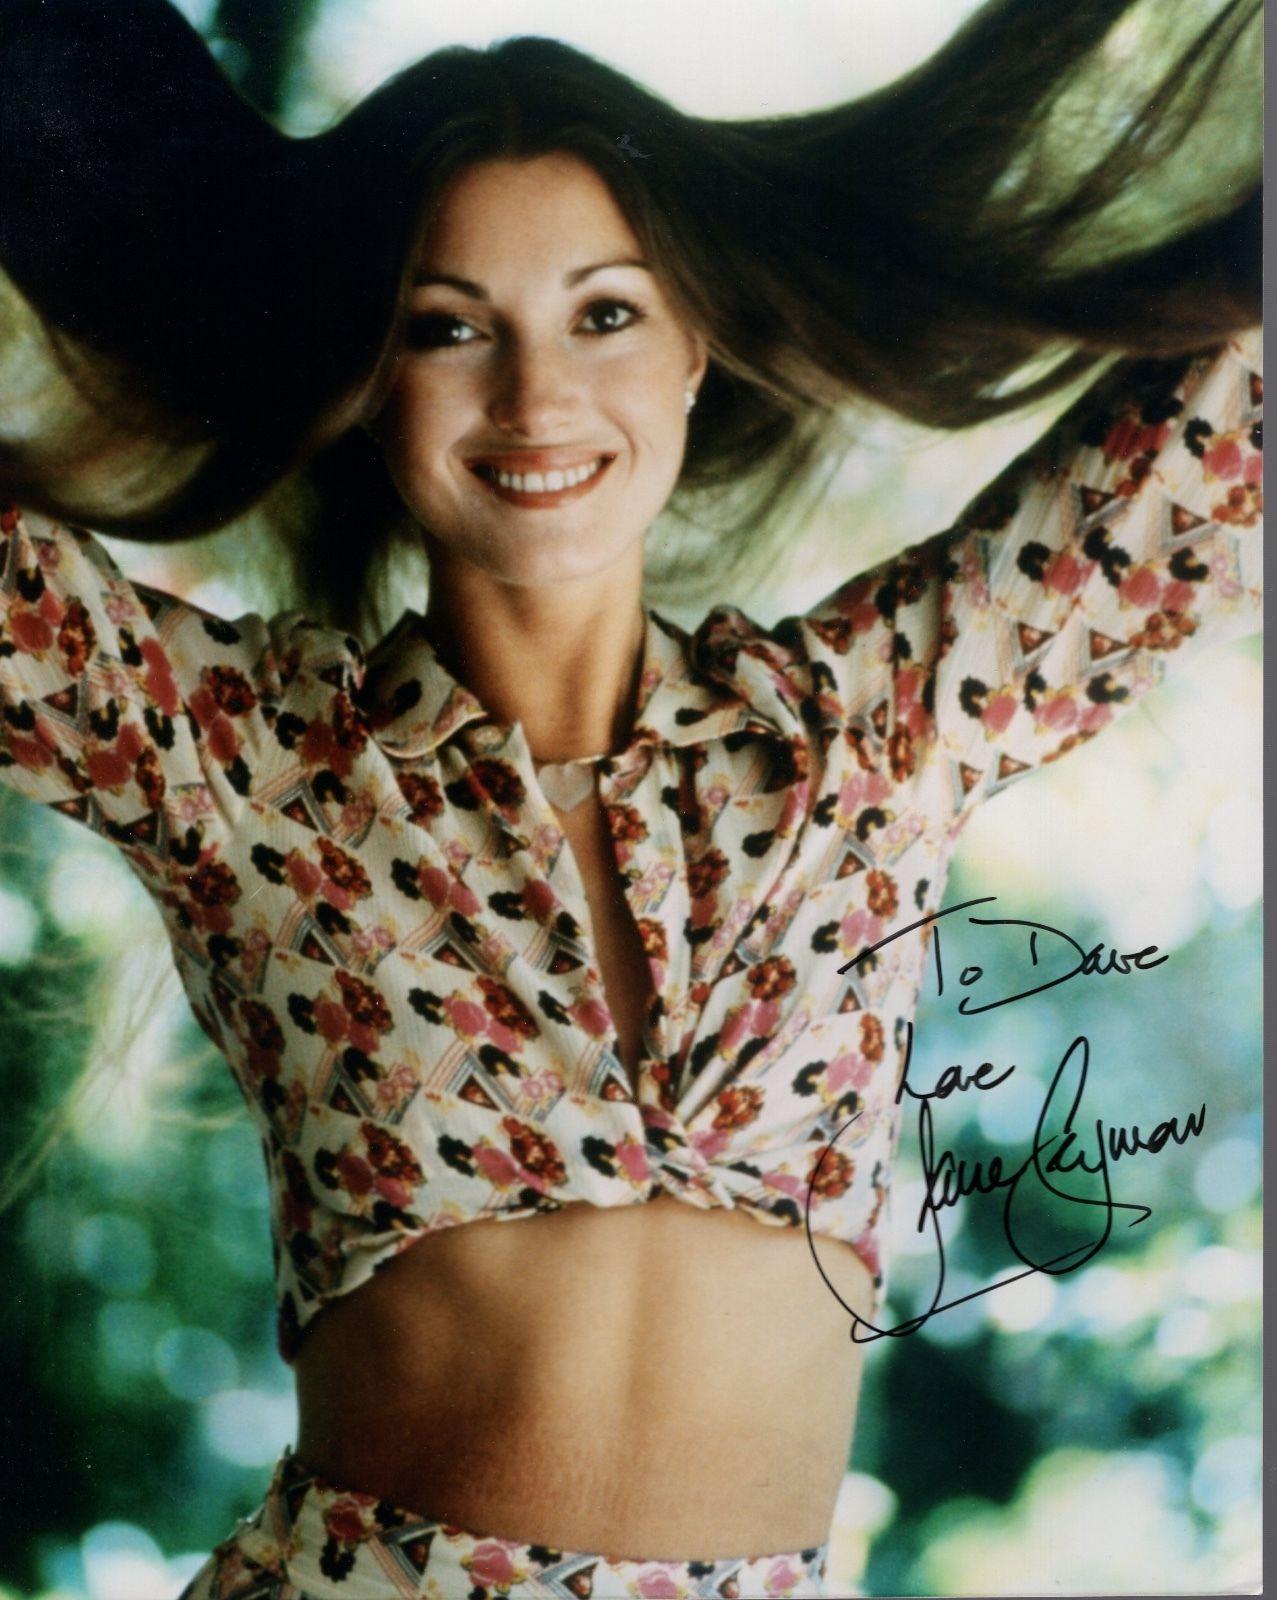 jane-seymour-hand-signed-8x10-color-photocoa-younggorgeoussexy-to-dave4-t6722066-1600.jpg